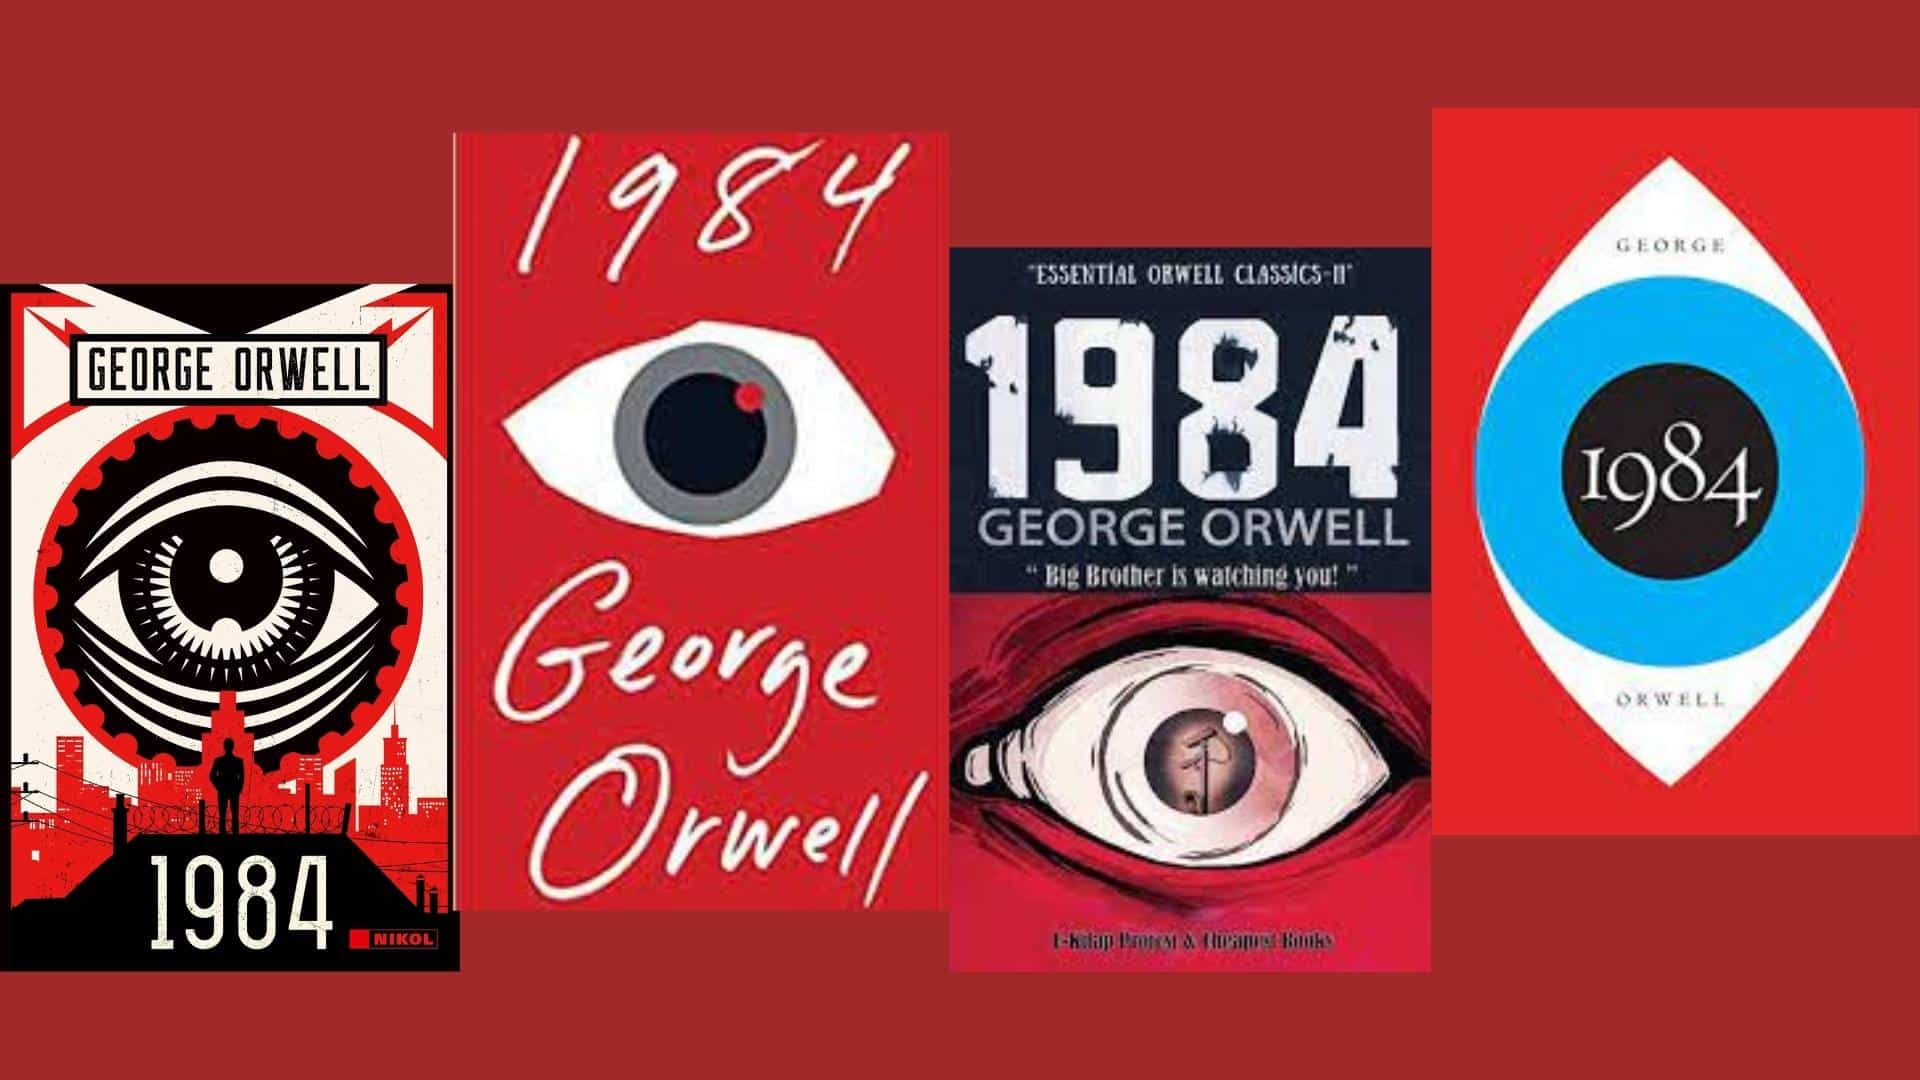 an image of 1984 by George Orwell